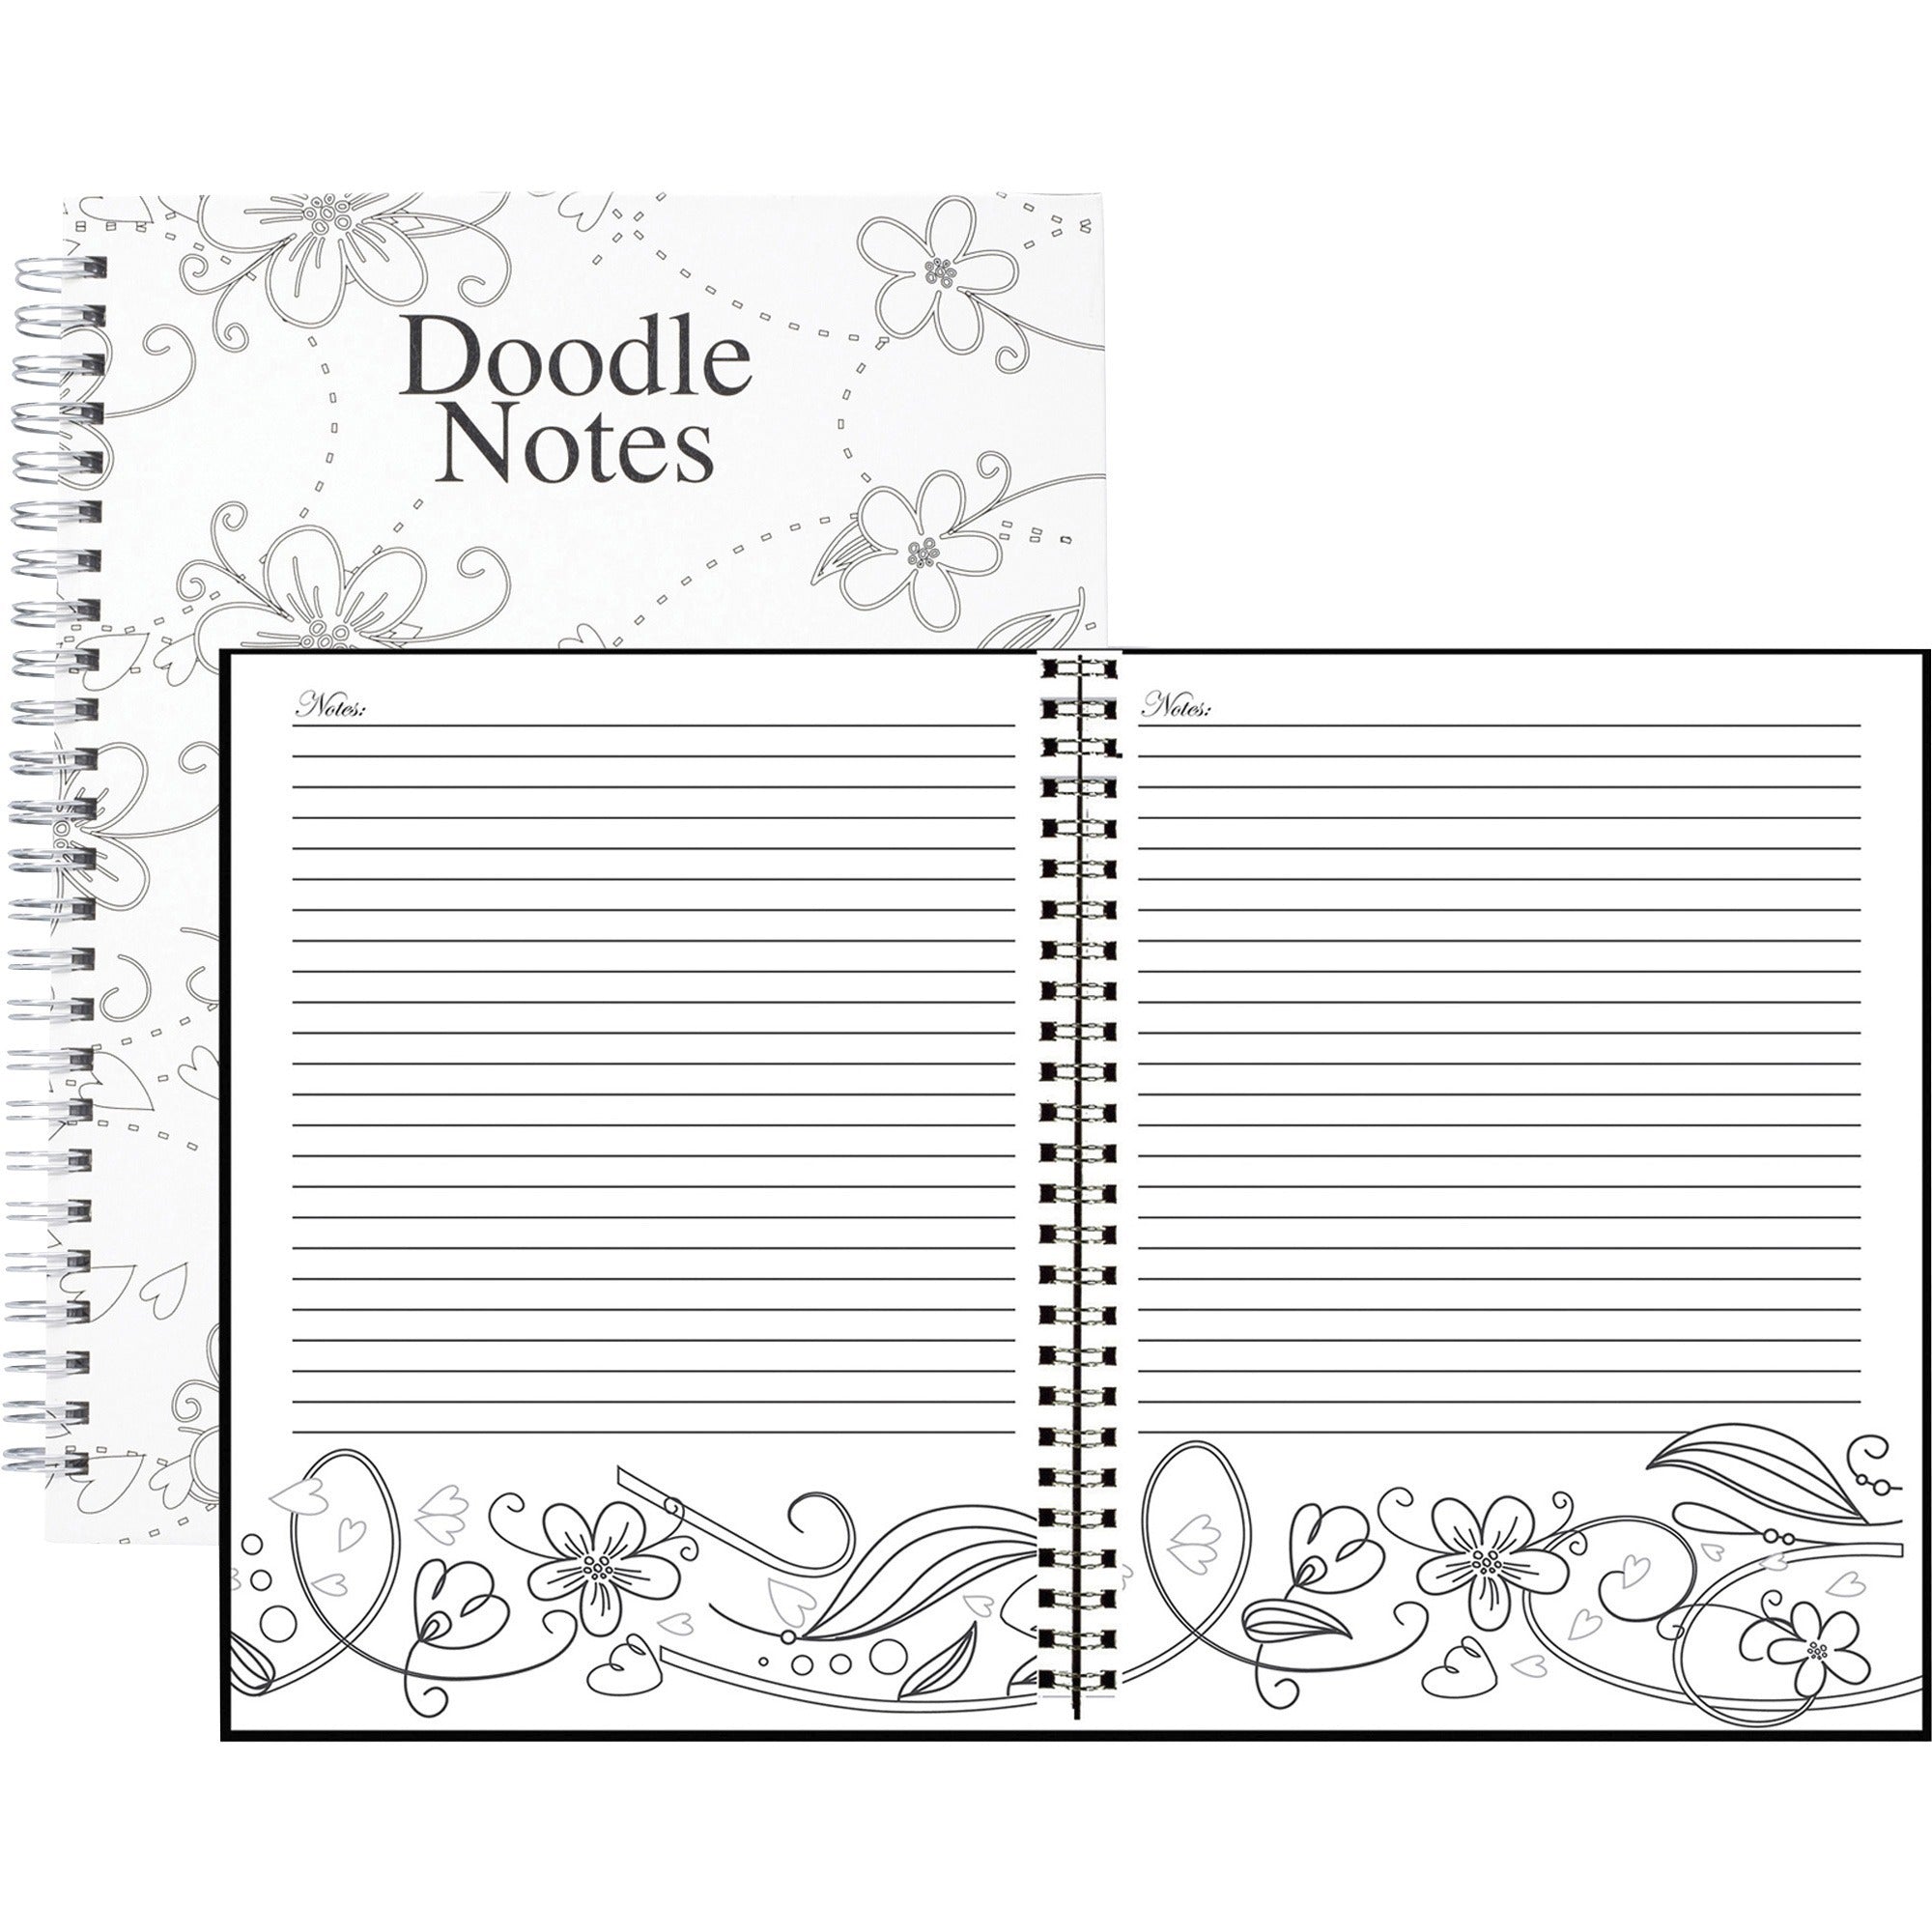 house-of-doolittle-doodle-notes-spiral-notebook-111-pages-spiral-bound-7-x-9-black-&-white-flower-cover-hard-cover-recycled-1-each_hod78190 - 1